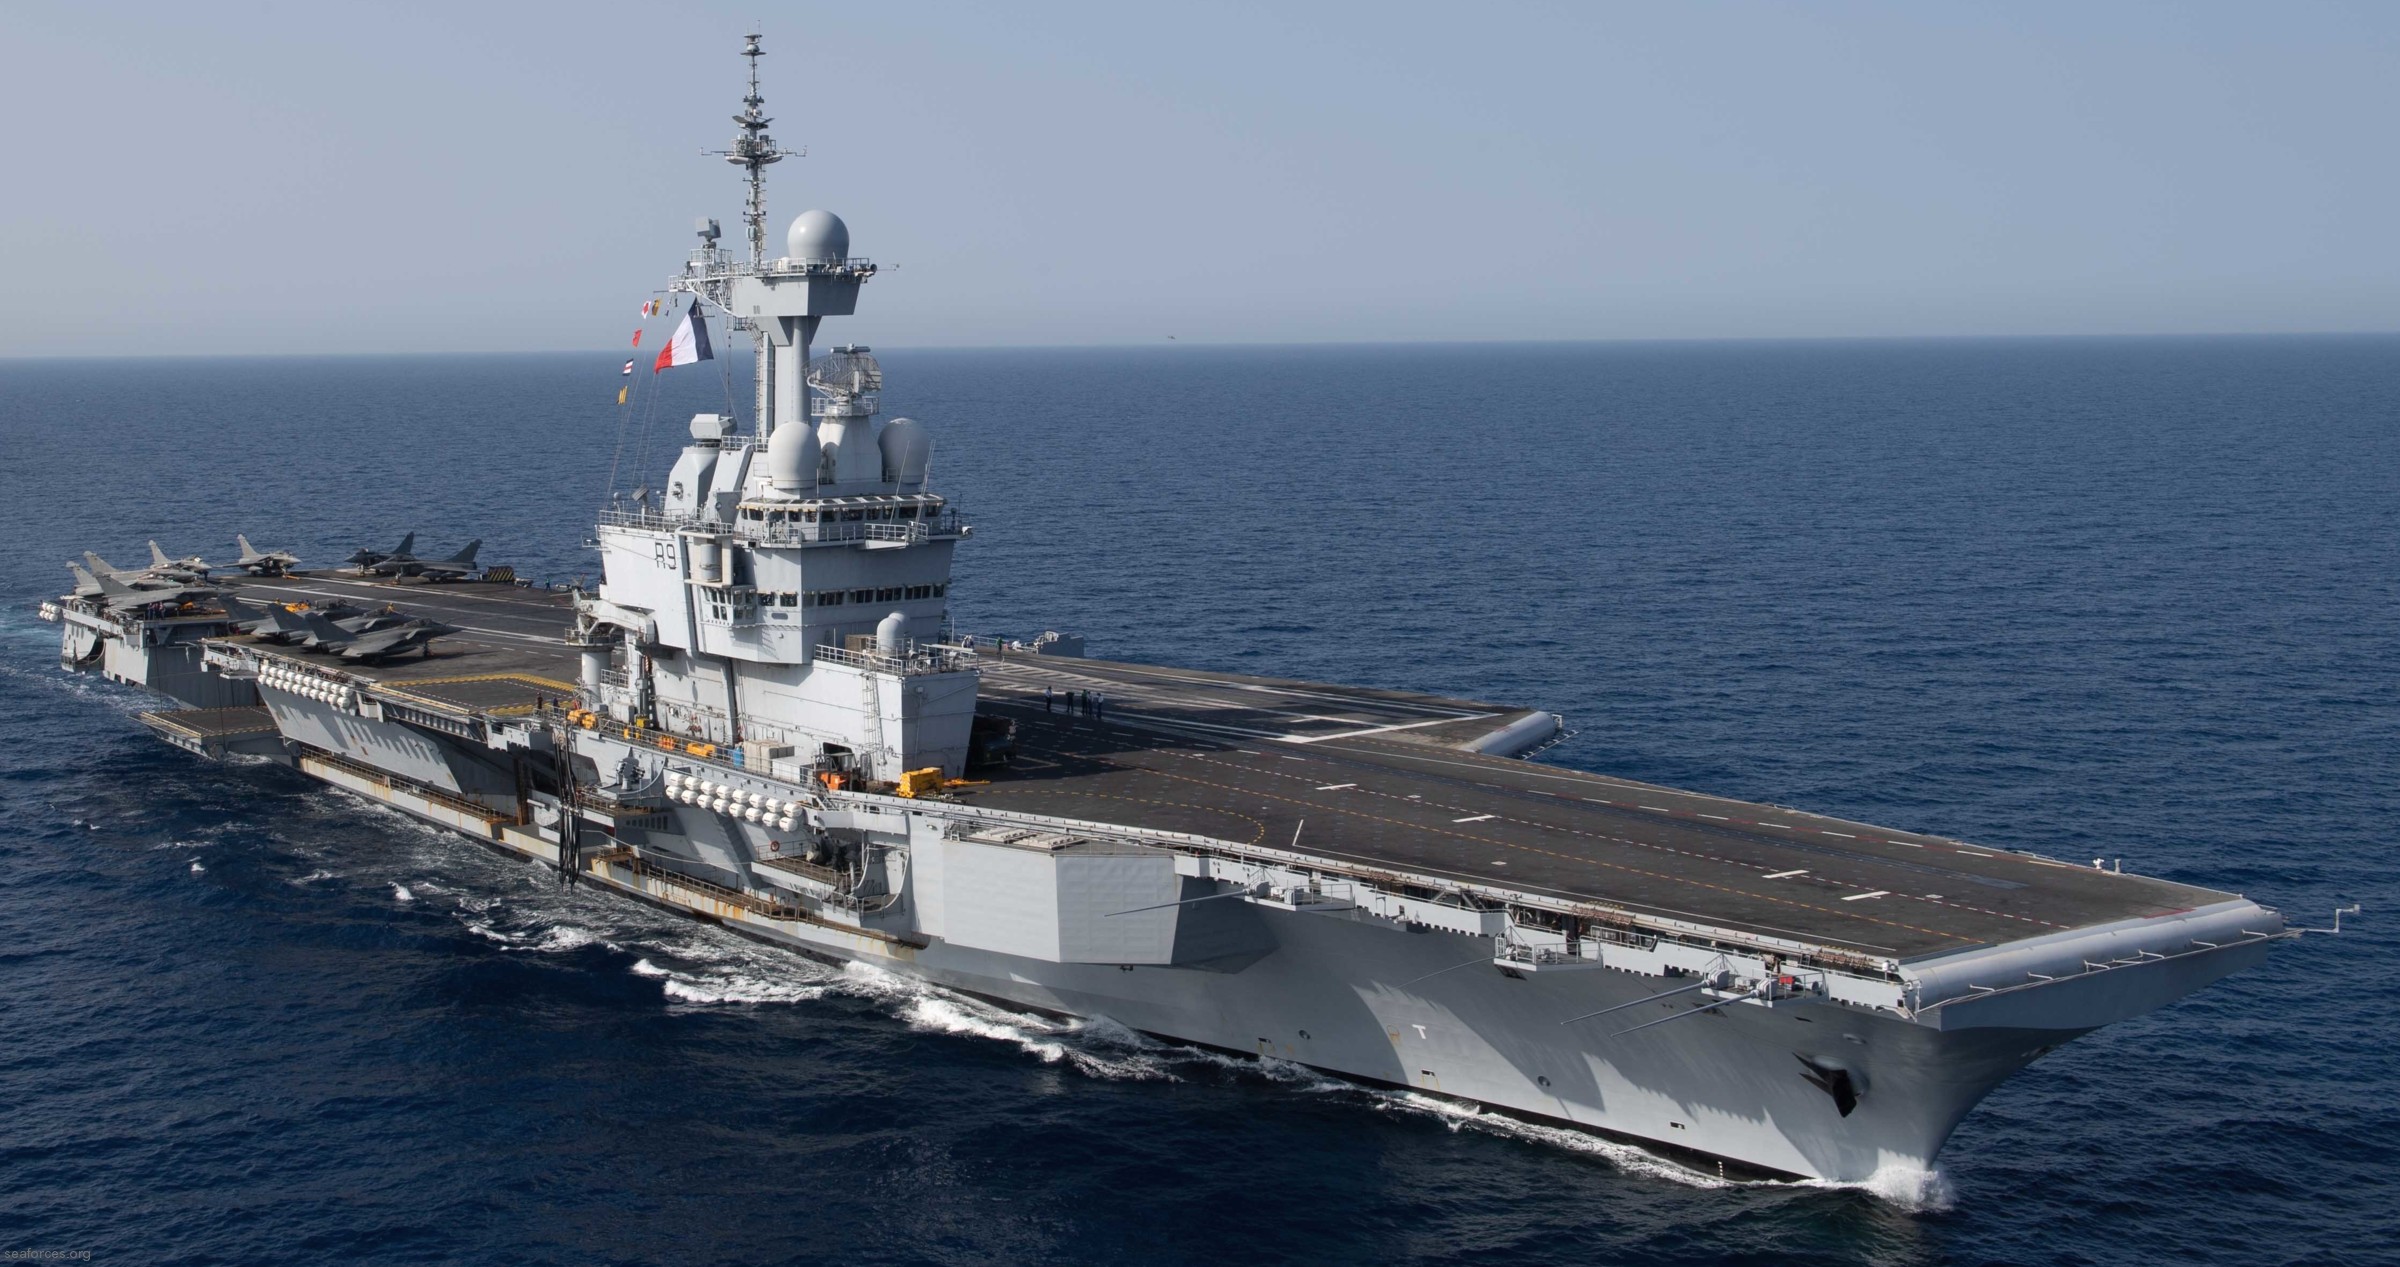 r-91 fs charles de gaulle aircraft carrier french navy marine nationale 63 rafale-m